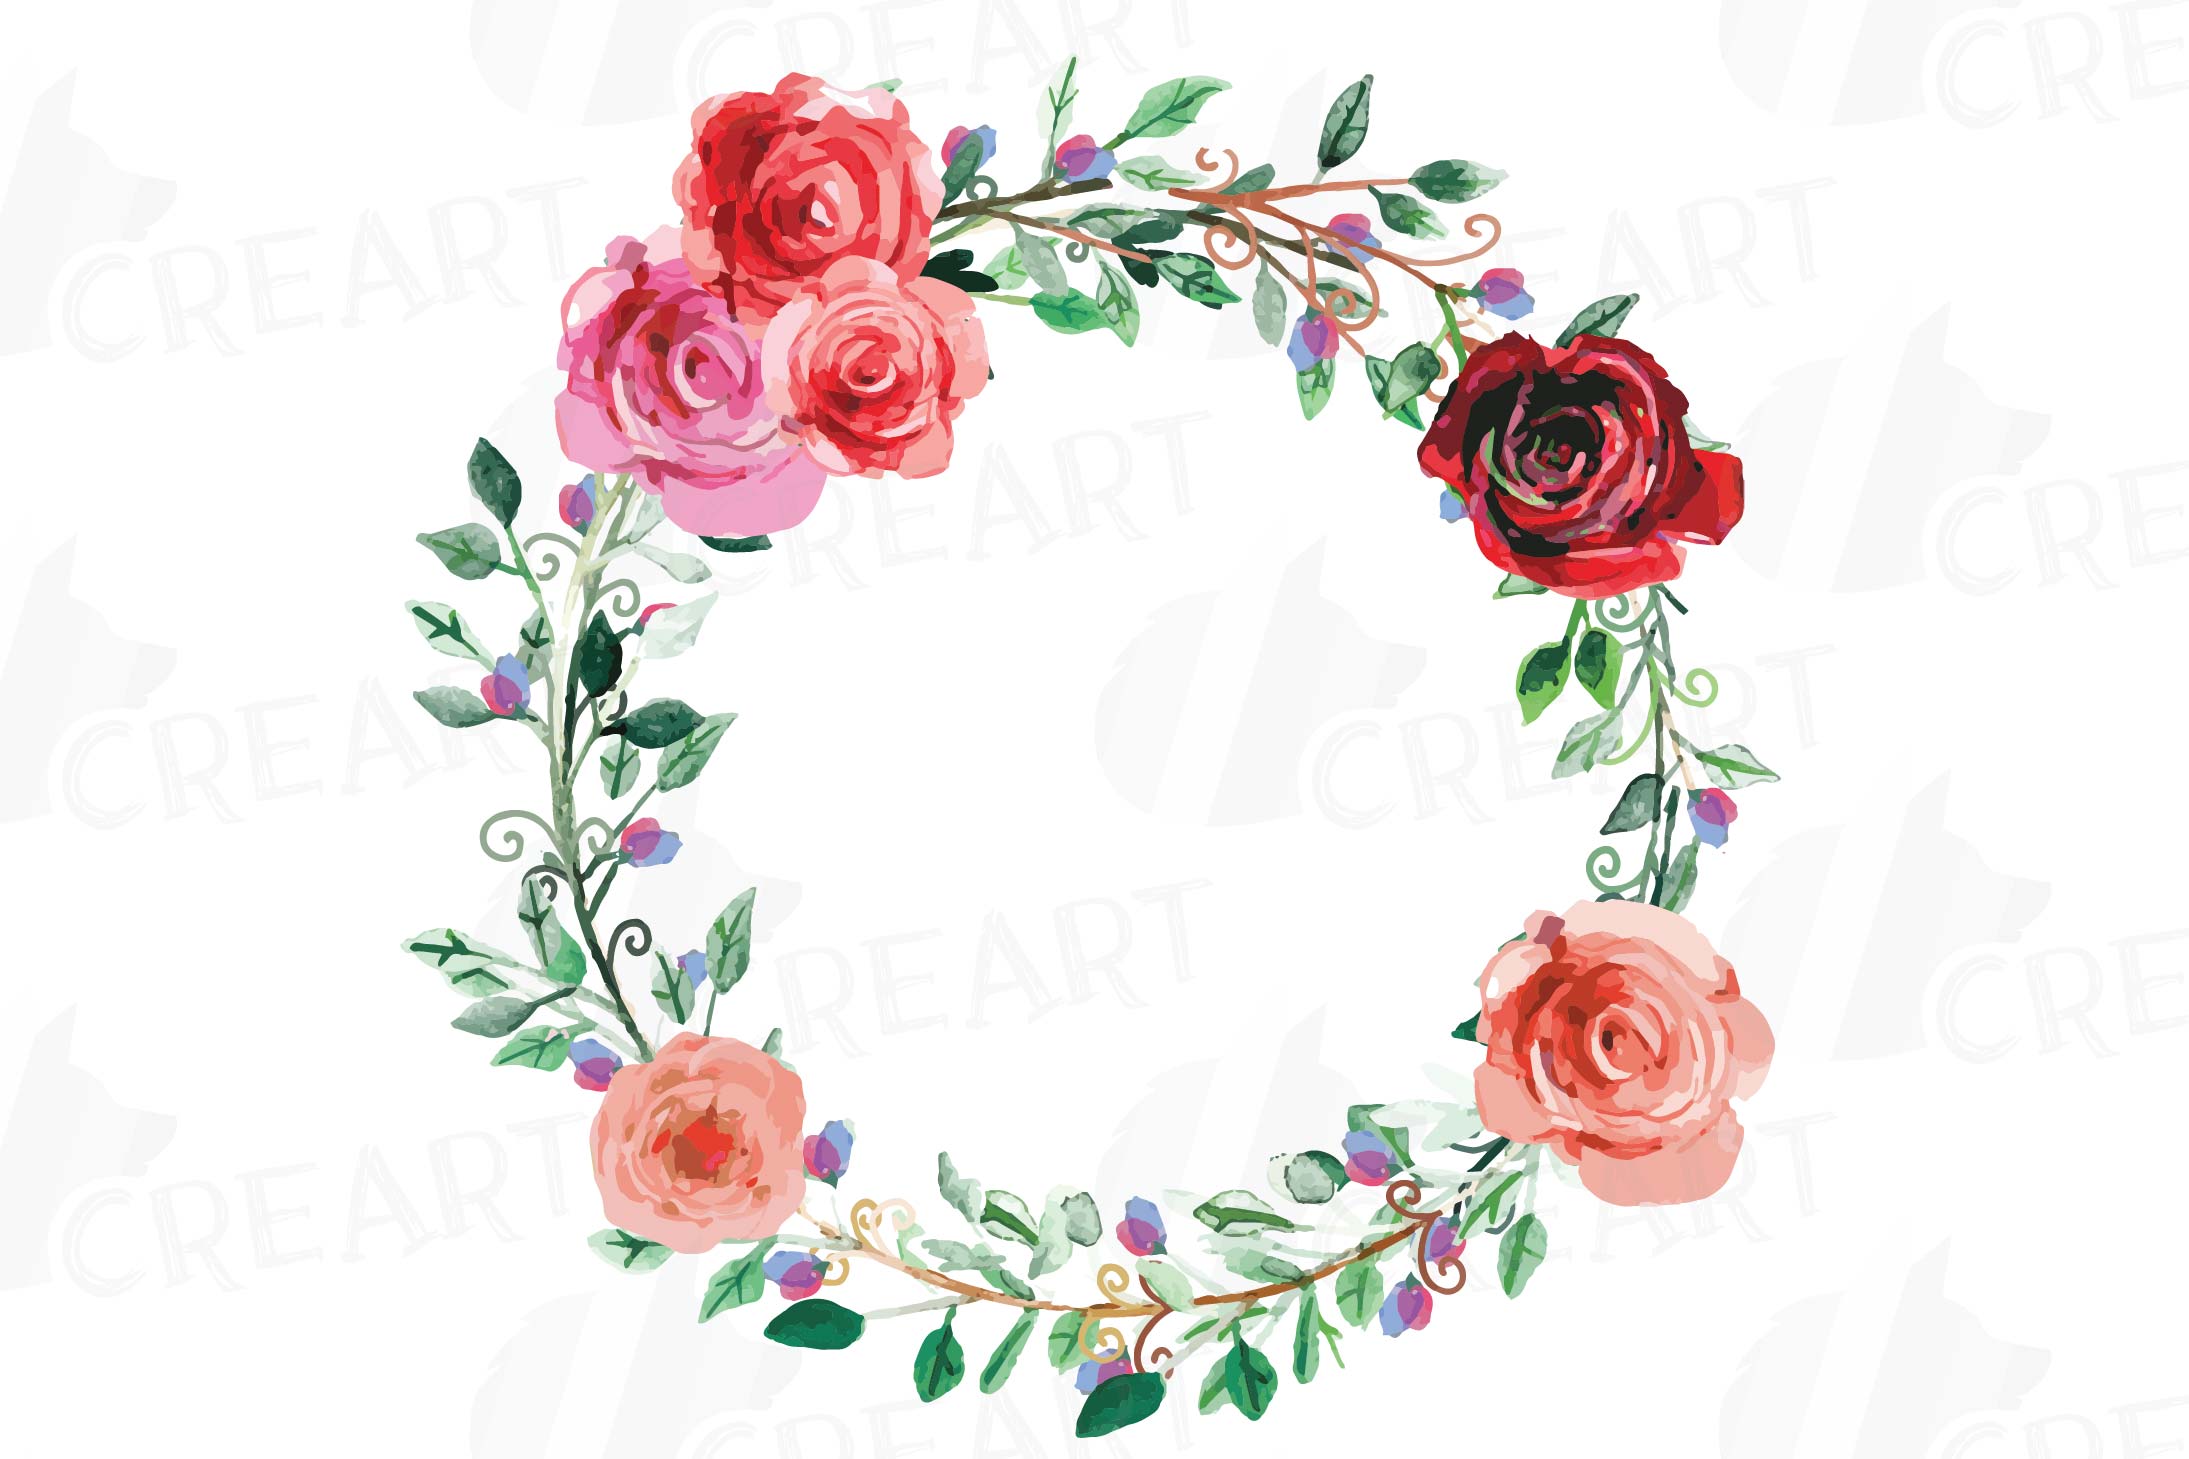 Floral wreath clip art, watercolor wreath with flowers png